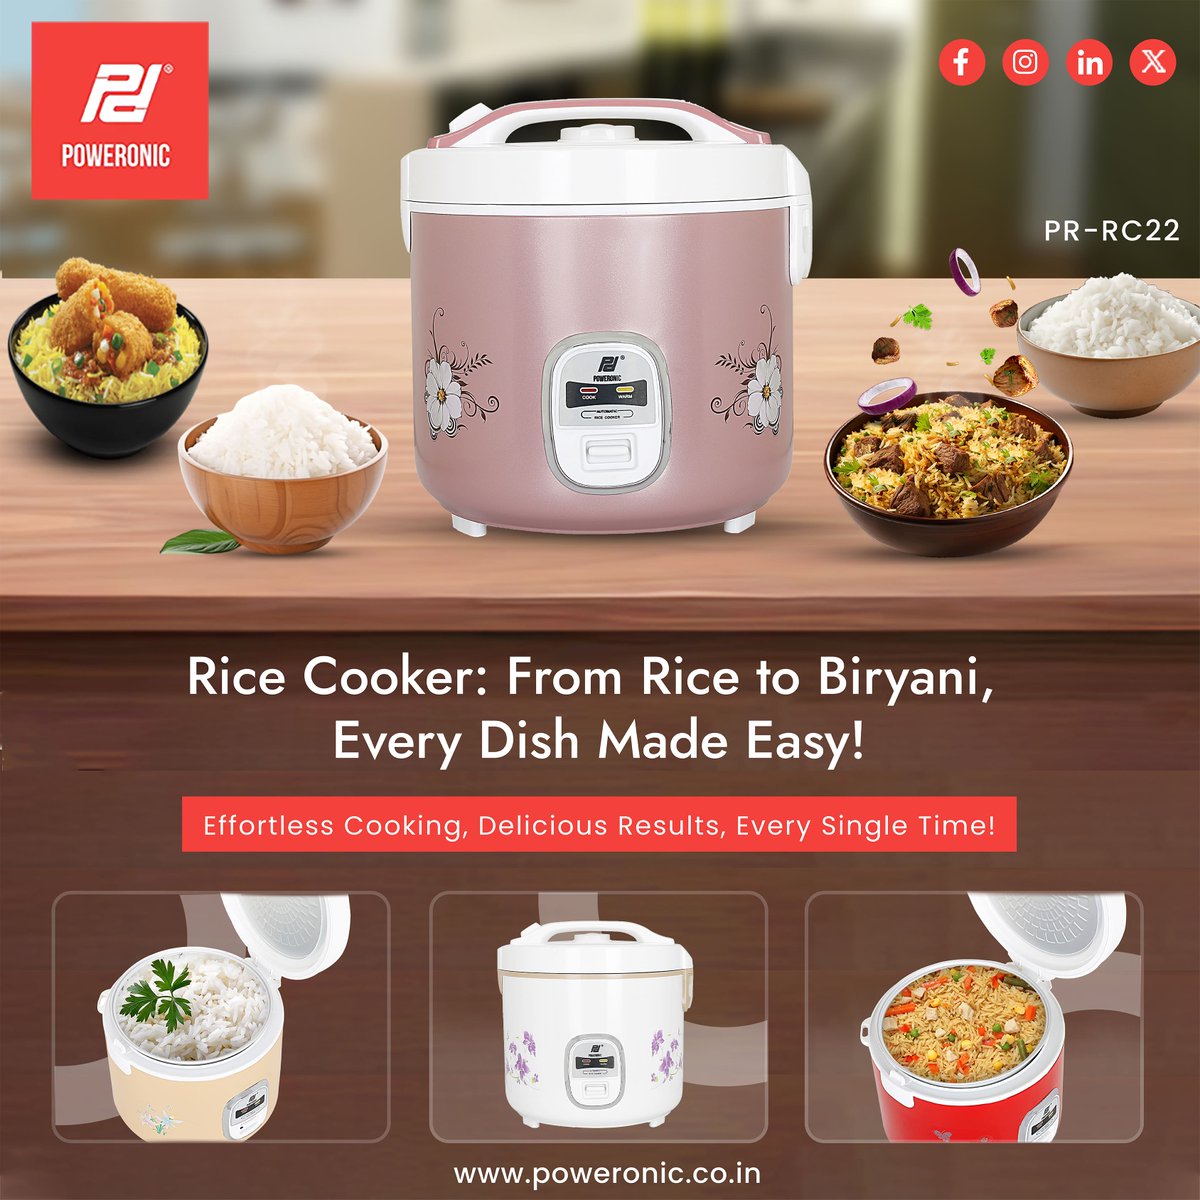 Elevate your cooking game today with Poweronic! 

#poweronic #ricecooker #ricecookerrecipe #poweronicdelhi #Poweronicappliances #airfryerdishes #AirFryerRecipes #kettle #infraredcooktop #ricecookermeal #MomentMarketing #explorepage #trendingpost